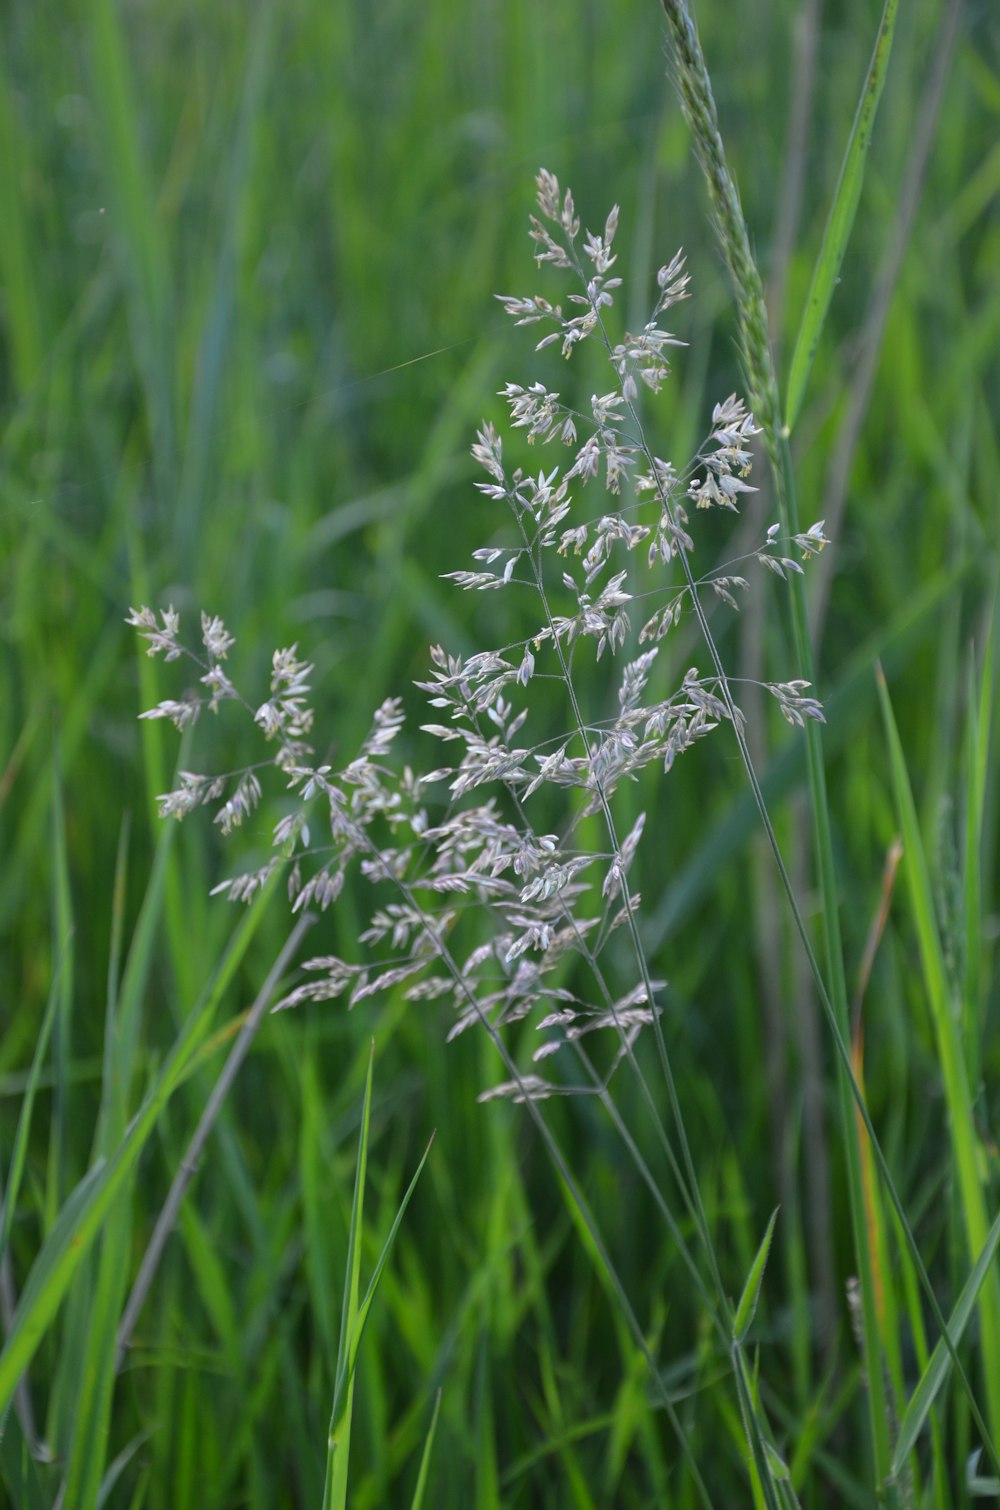 a close up of a plant in a field of grass